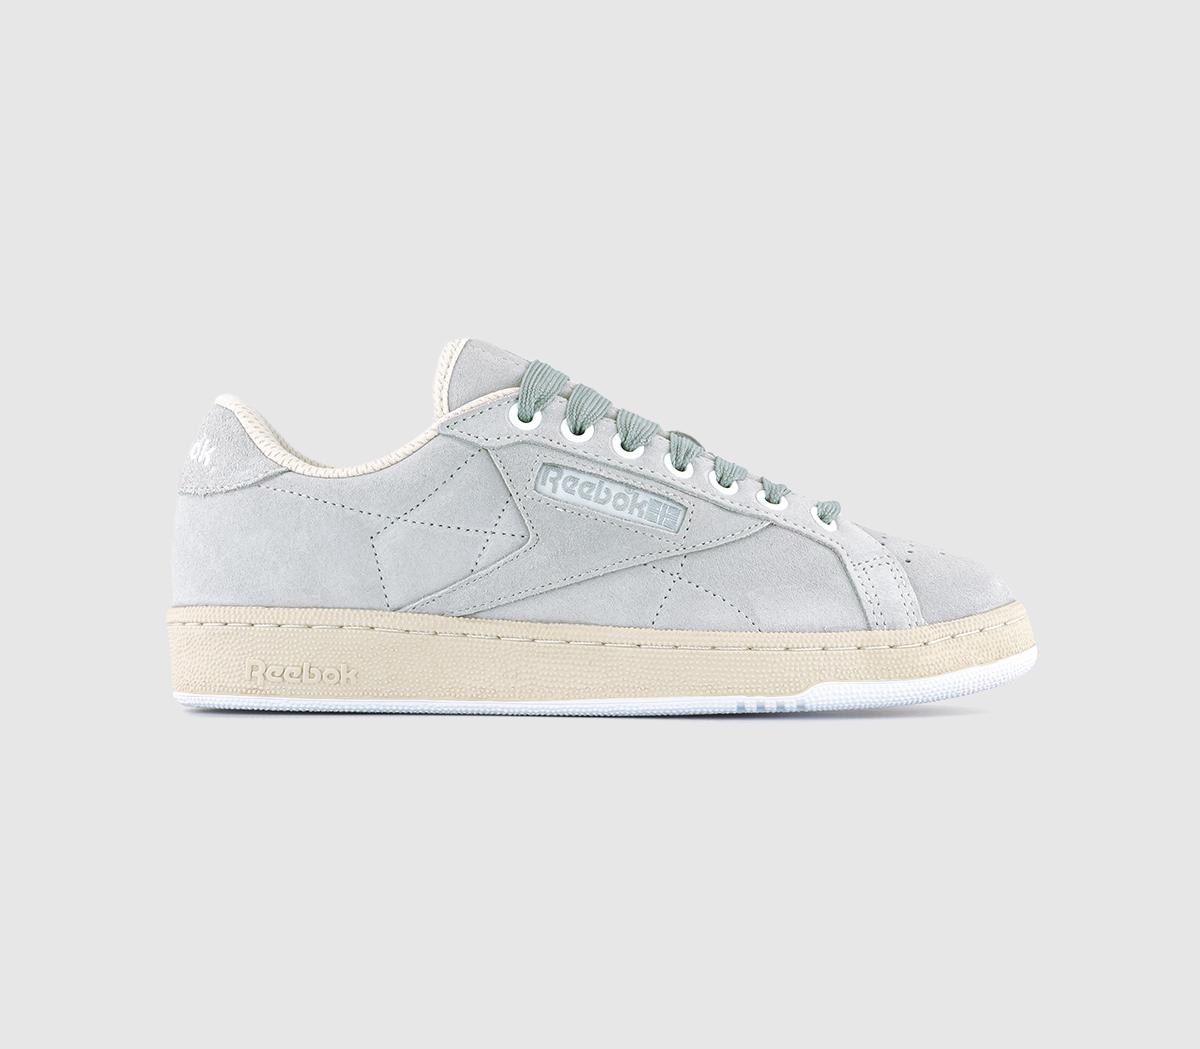 ReebokClub C Grounds TrainersSneeze Cold Grey Alabaster White